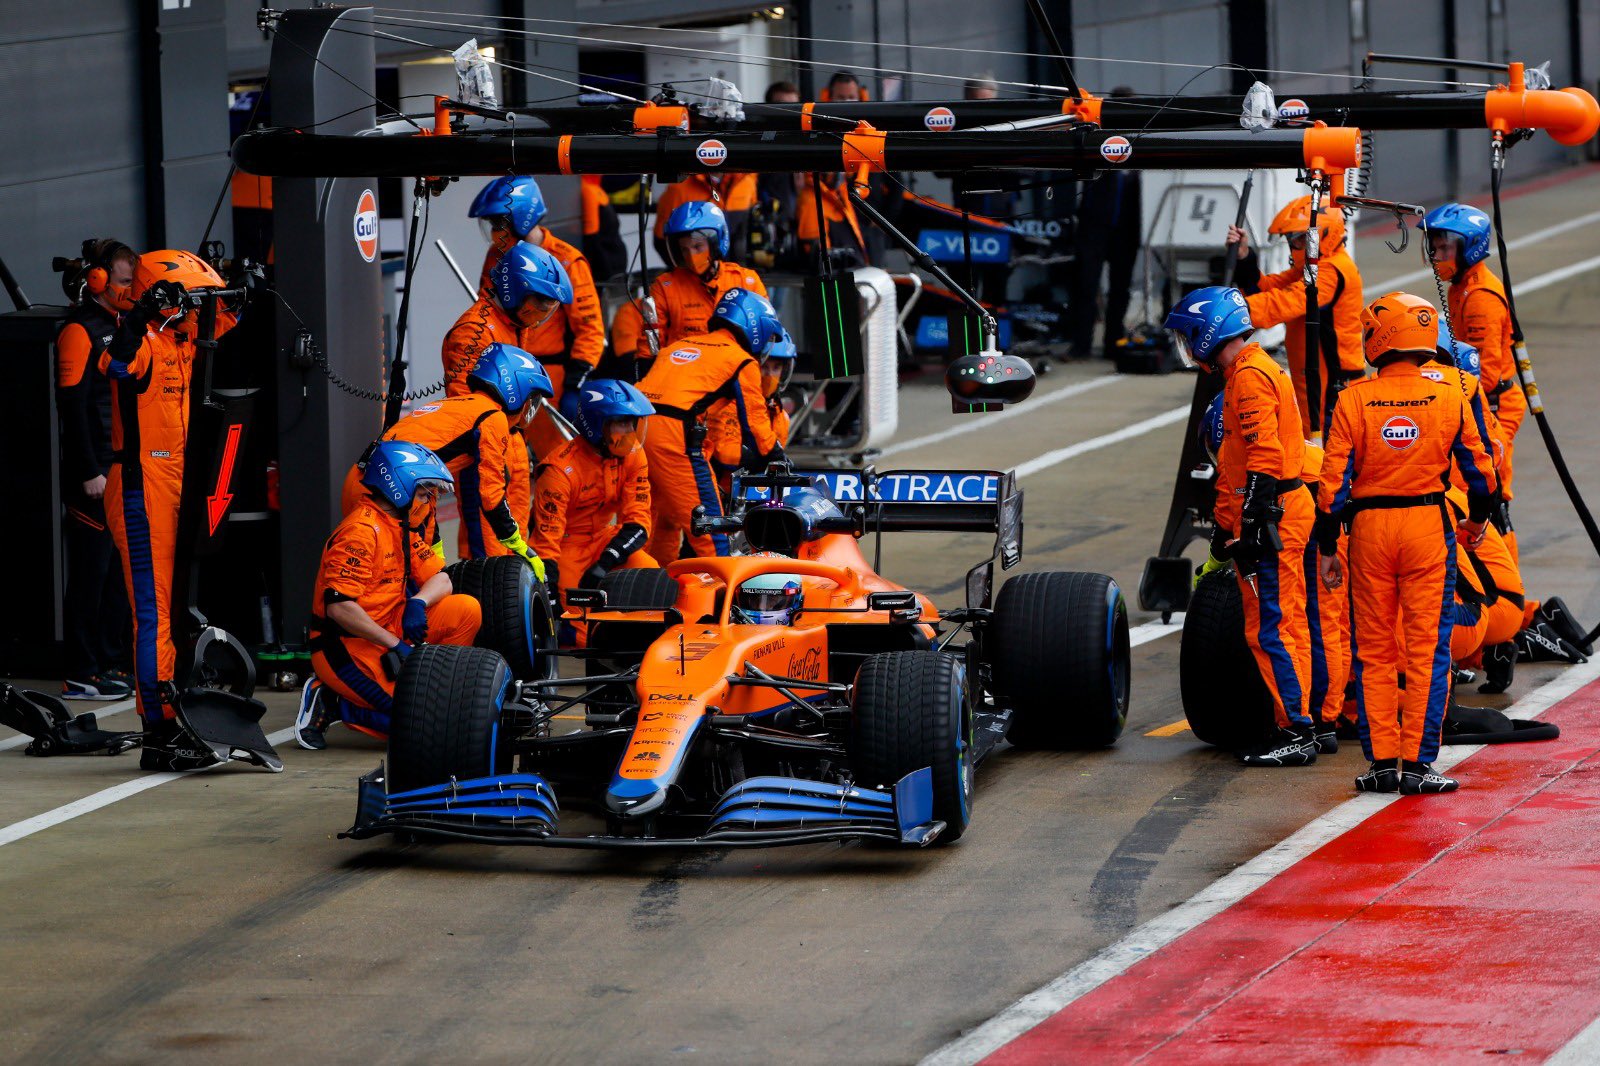 Mclaren not satisfied with Pirelli tyre blow explanation, calls on FIA for transparency